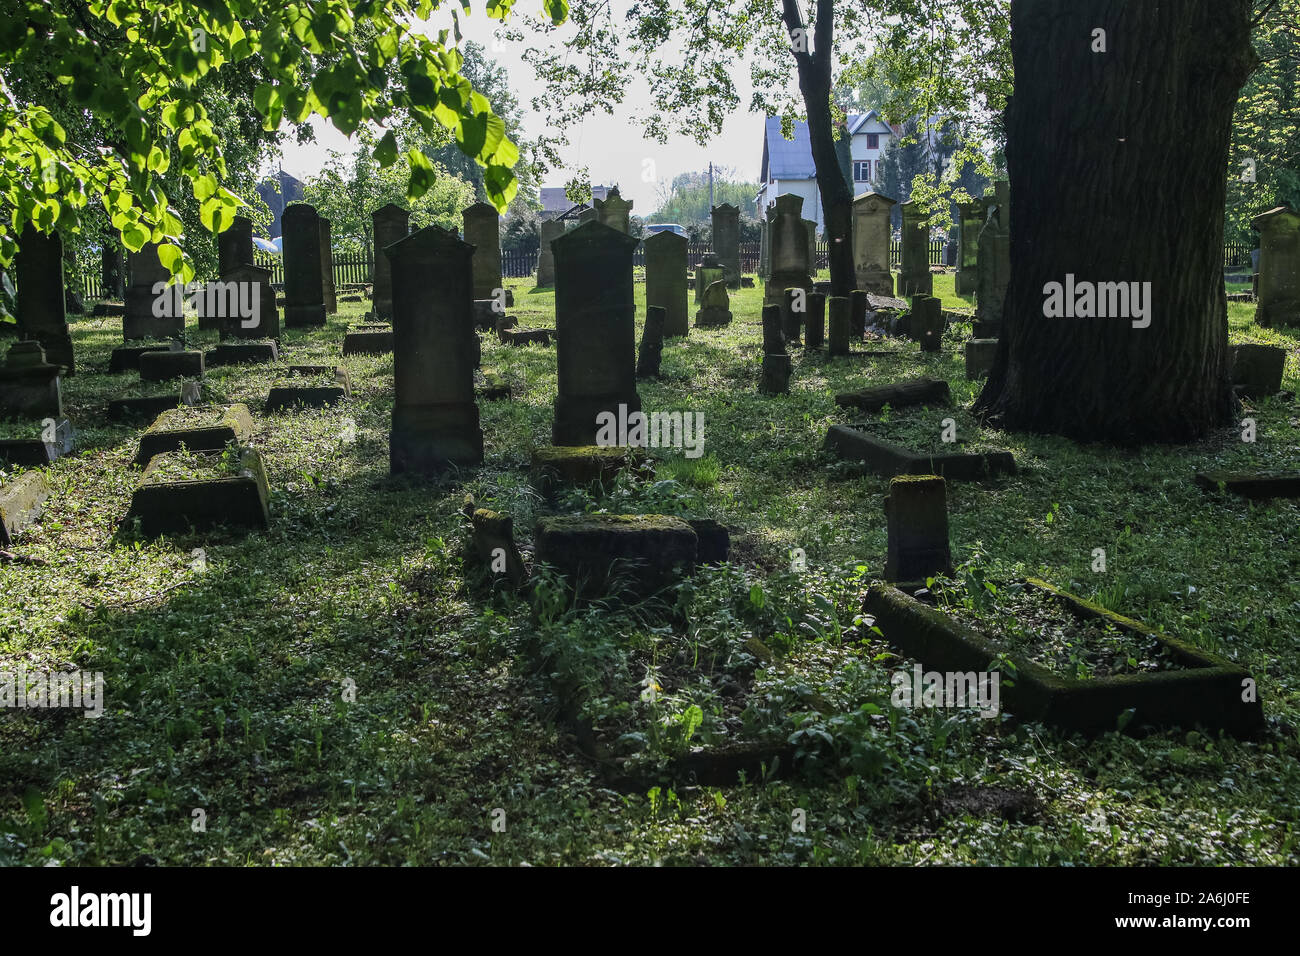 The Mennonite Cemetery area is seen in Stogi Malborskie, Poland, on 18 May 2019 Village of Stogi was founded in 1562 in the area of Zulawy Wielkie, and 3 years later was leased to Dutch settlers, the Mennonites. Mennonites are adherents of a religious movement, a faction of Anabaptism, which was founded in the Netherlands in the 16th Century © Michal Fludra / Alamy Live News Stock Photo